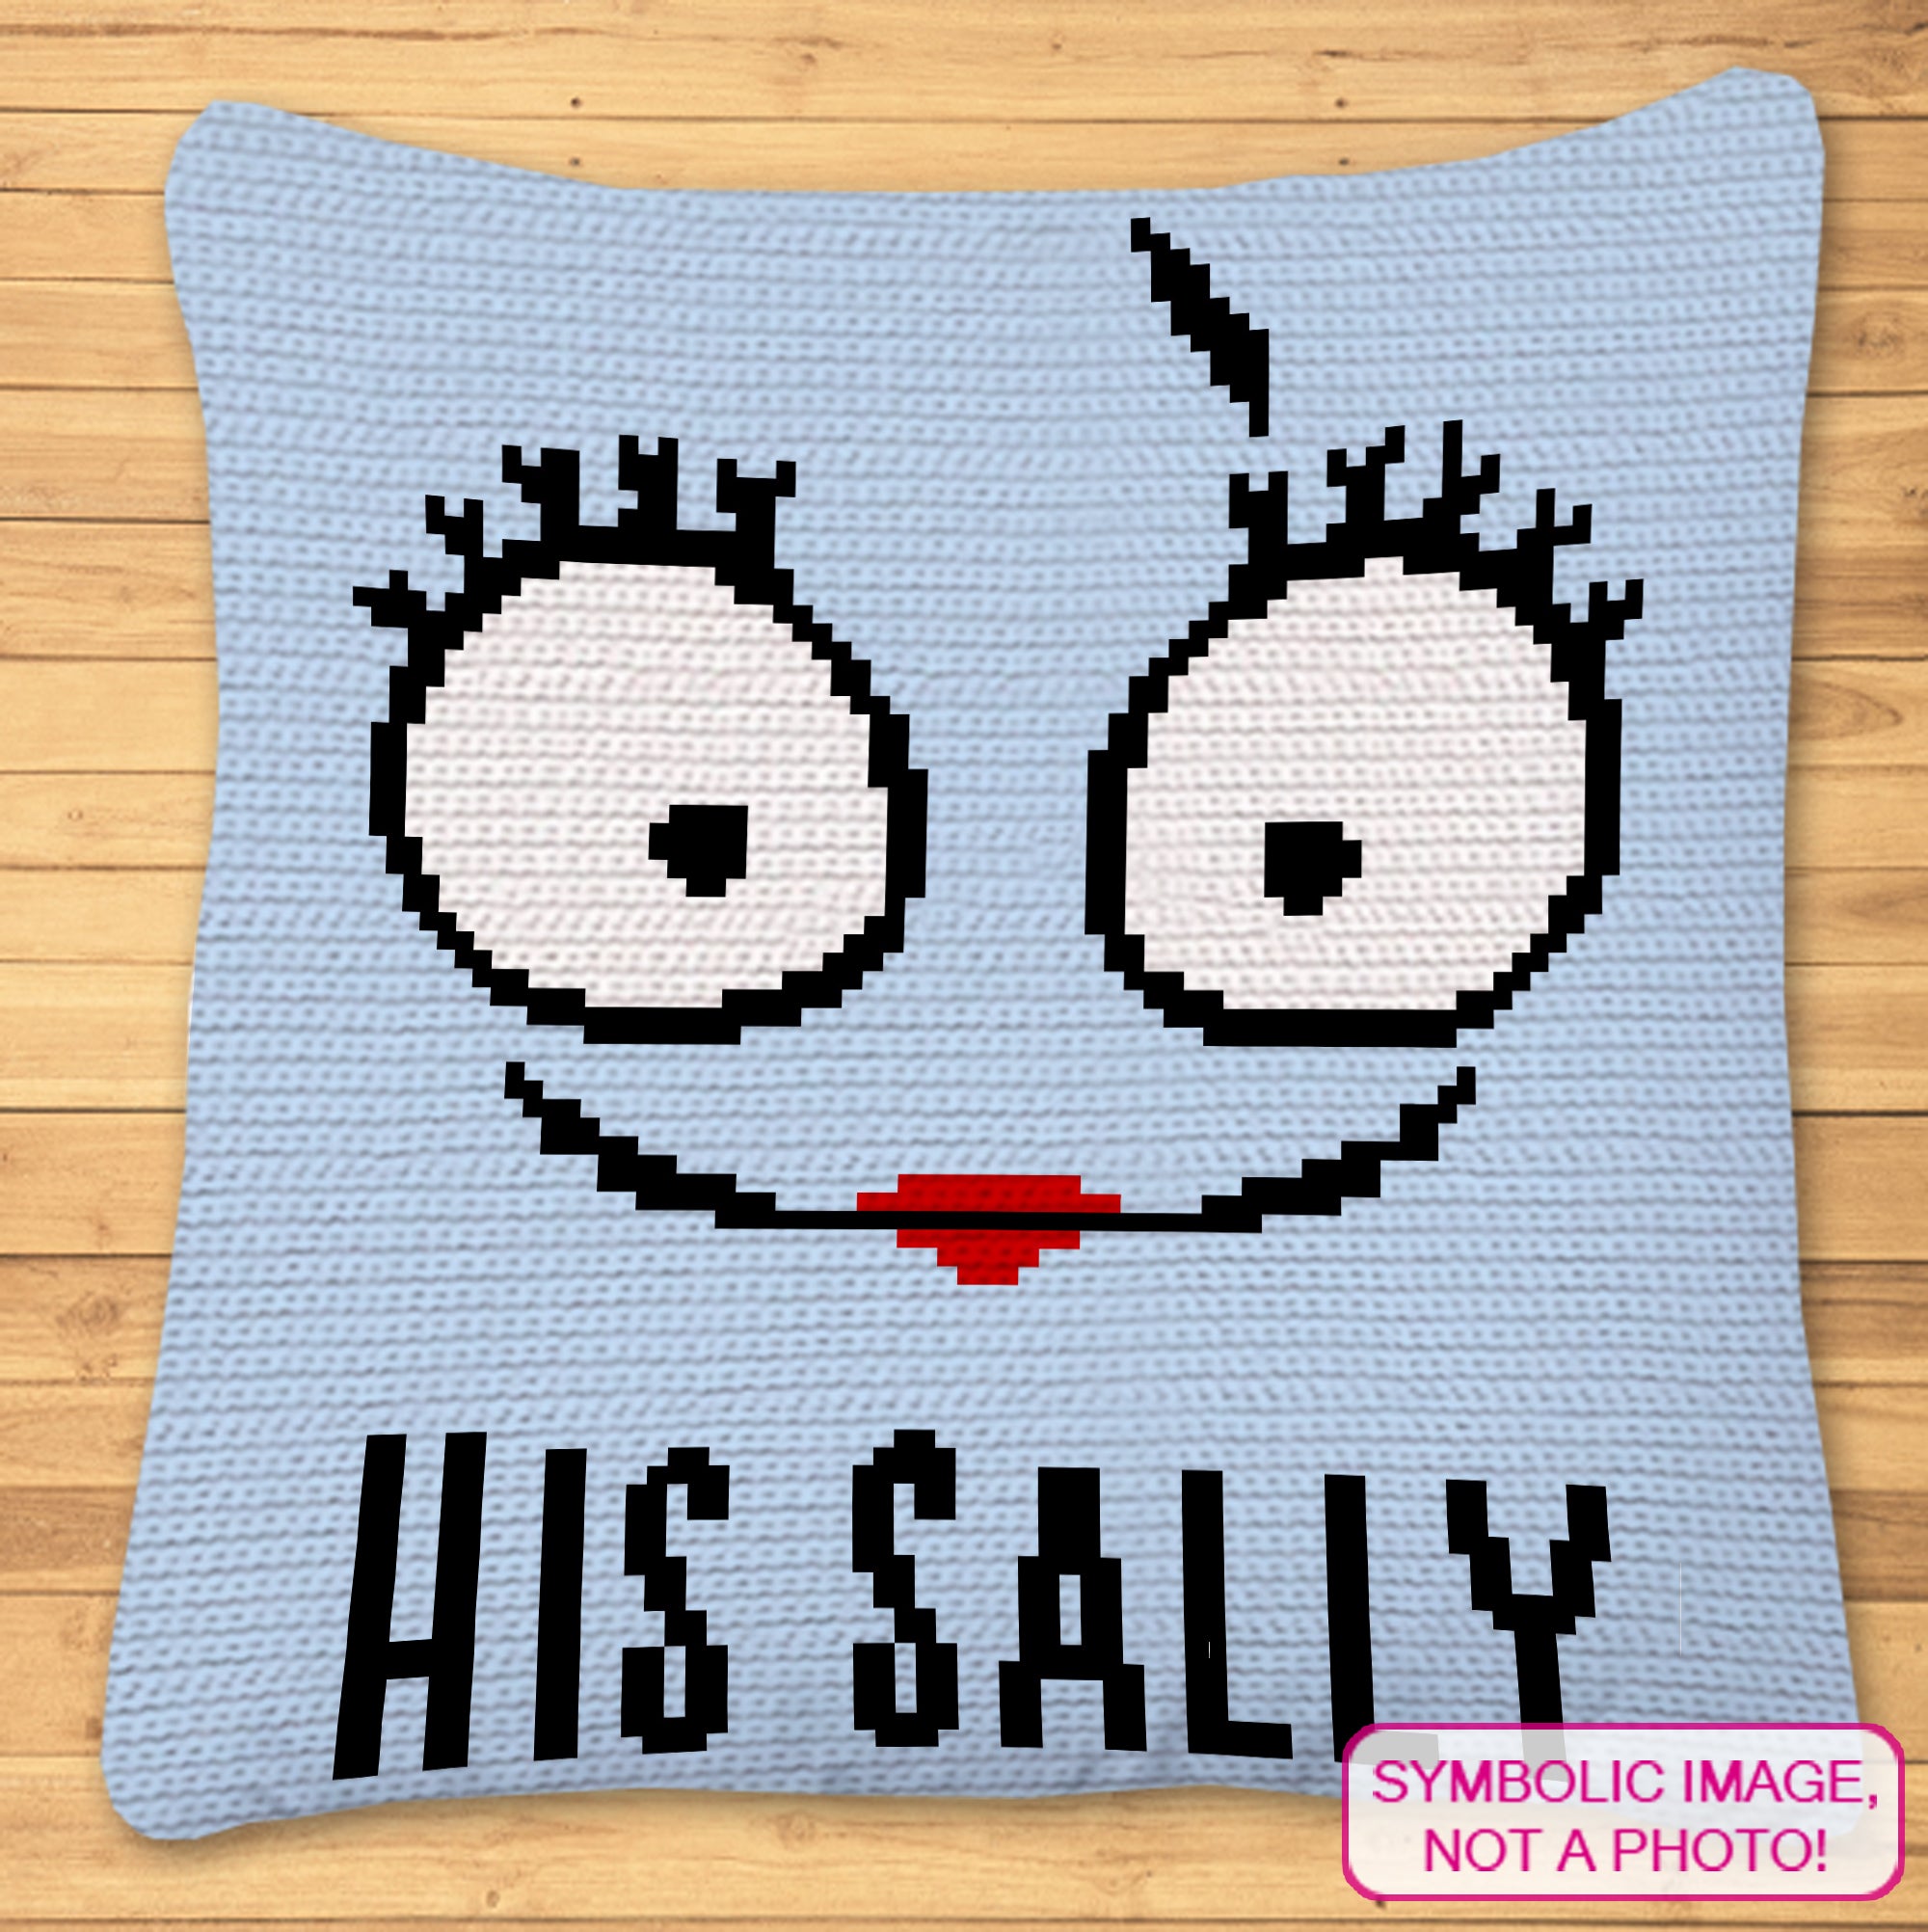 His Sally - Tapestry Crochet Pillow Pattern